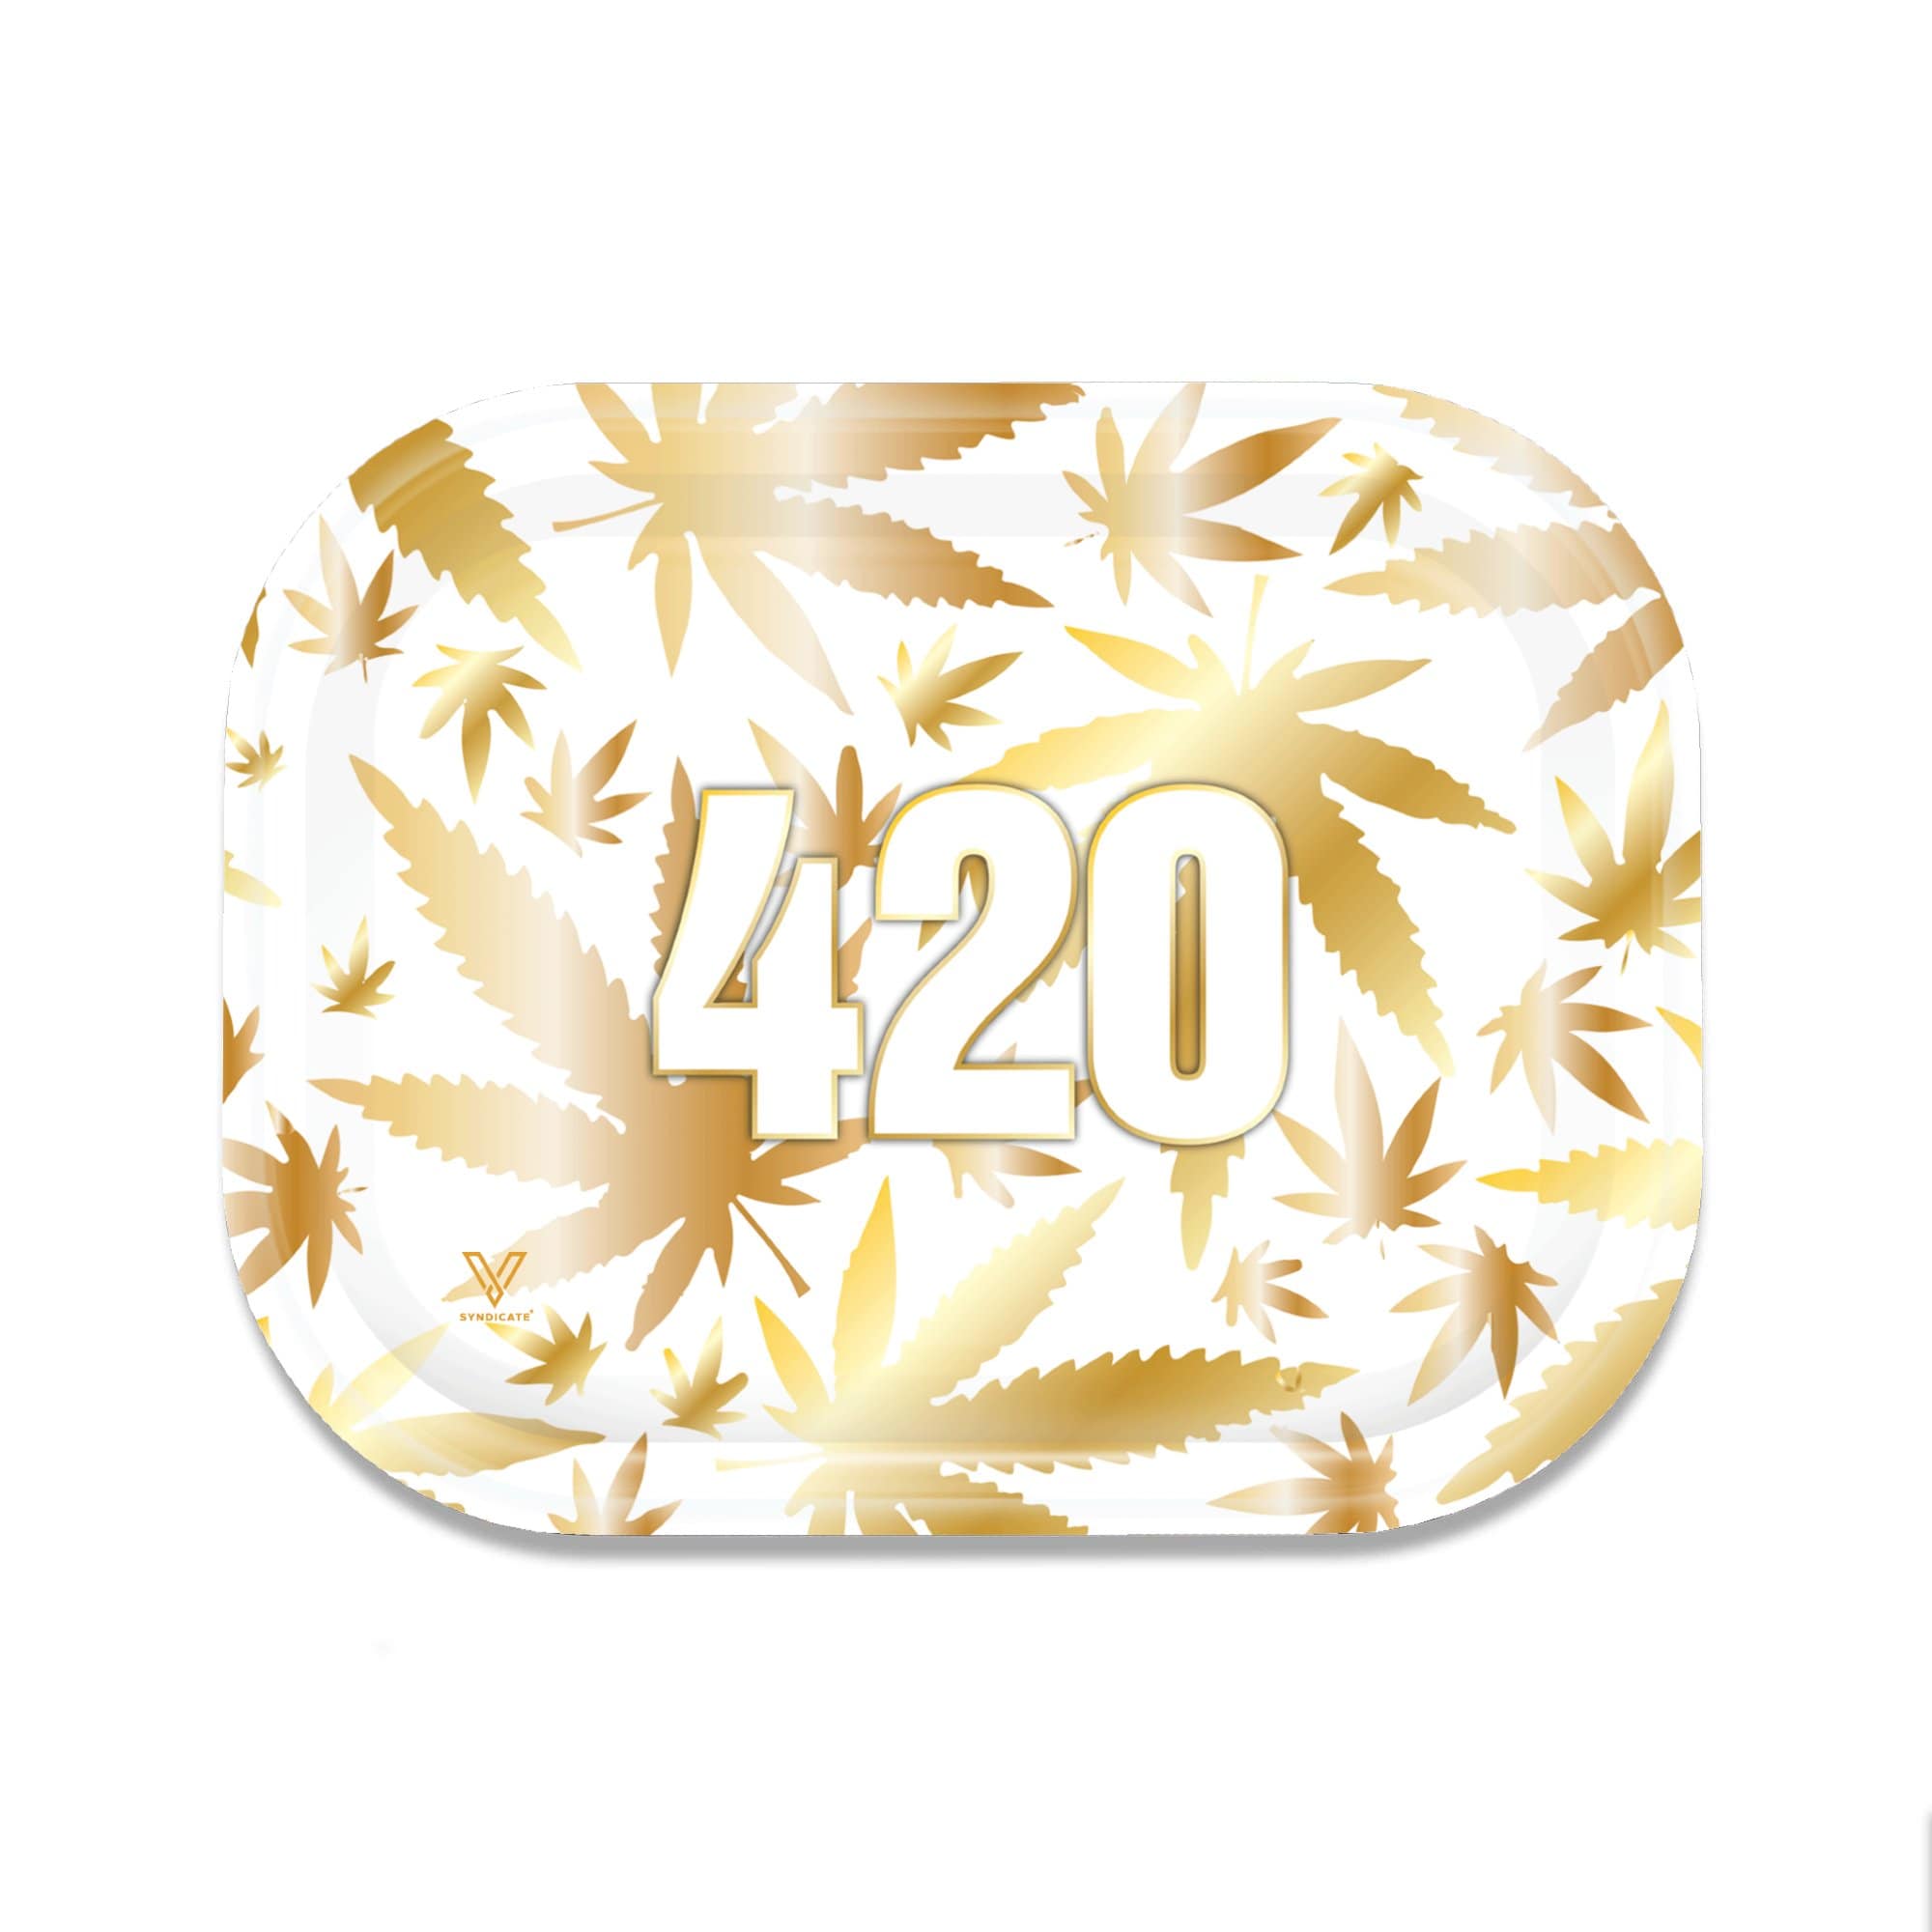 V Syndicate 420 Gold Metal Rollin' Tray - Glasss Station